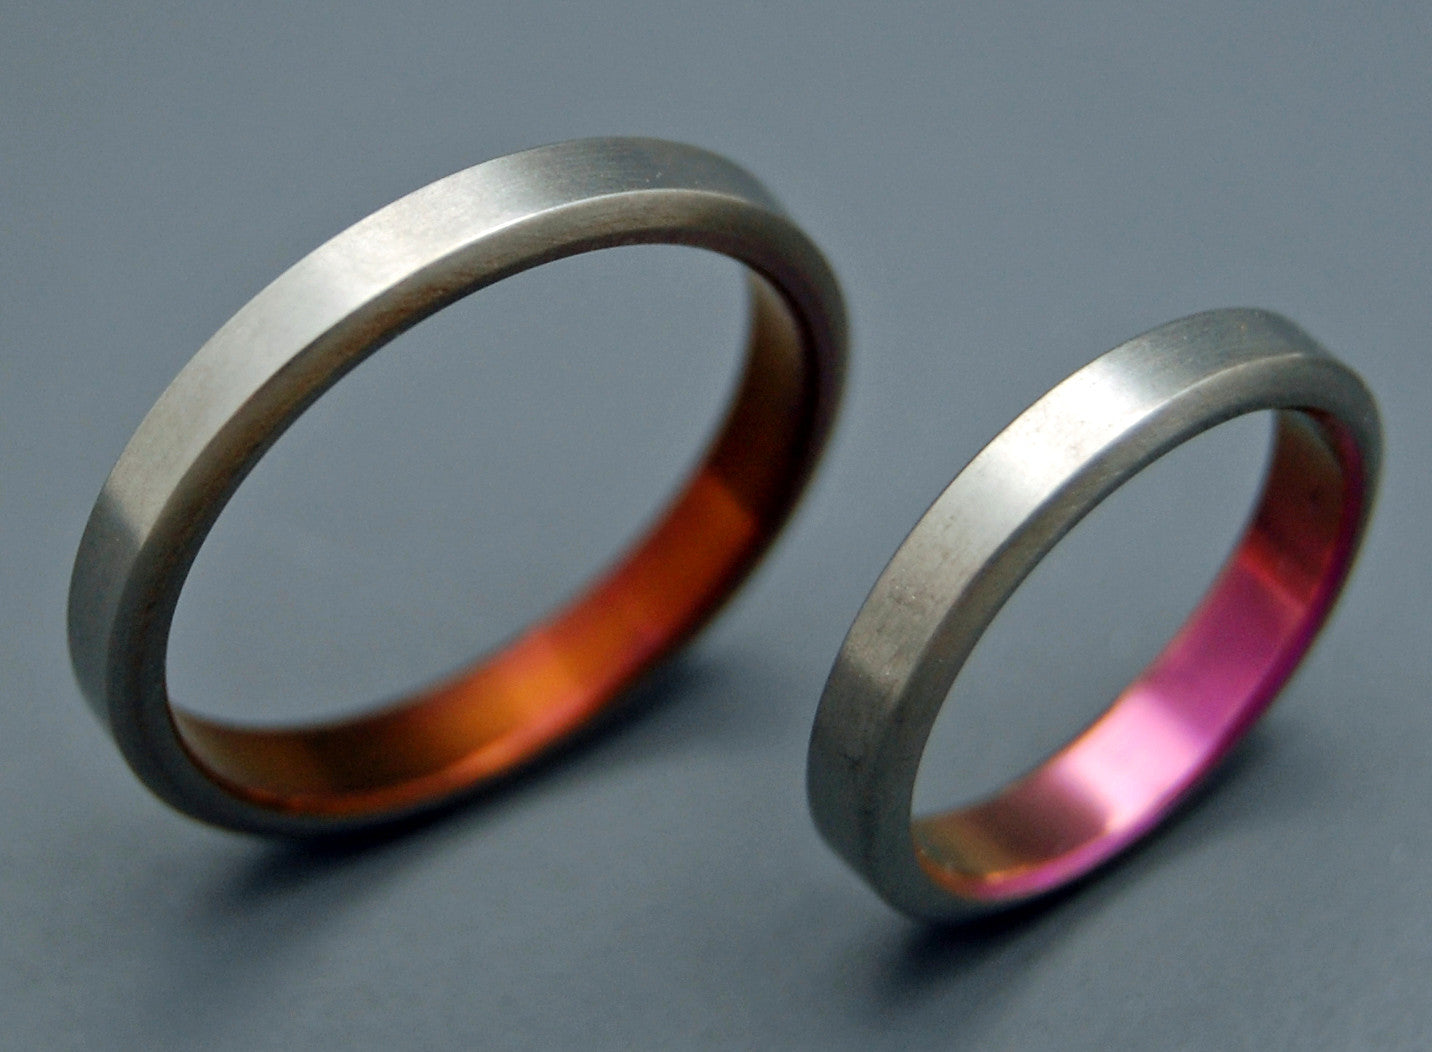 CINNAMON & SPICE | Bronze & Pink Anodized Titanium Wedding Rings - His & Hers Wedding Band Set - Minter and Richter Designs